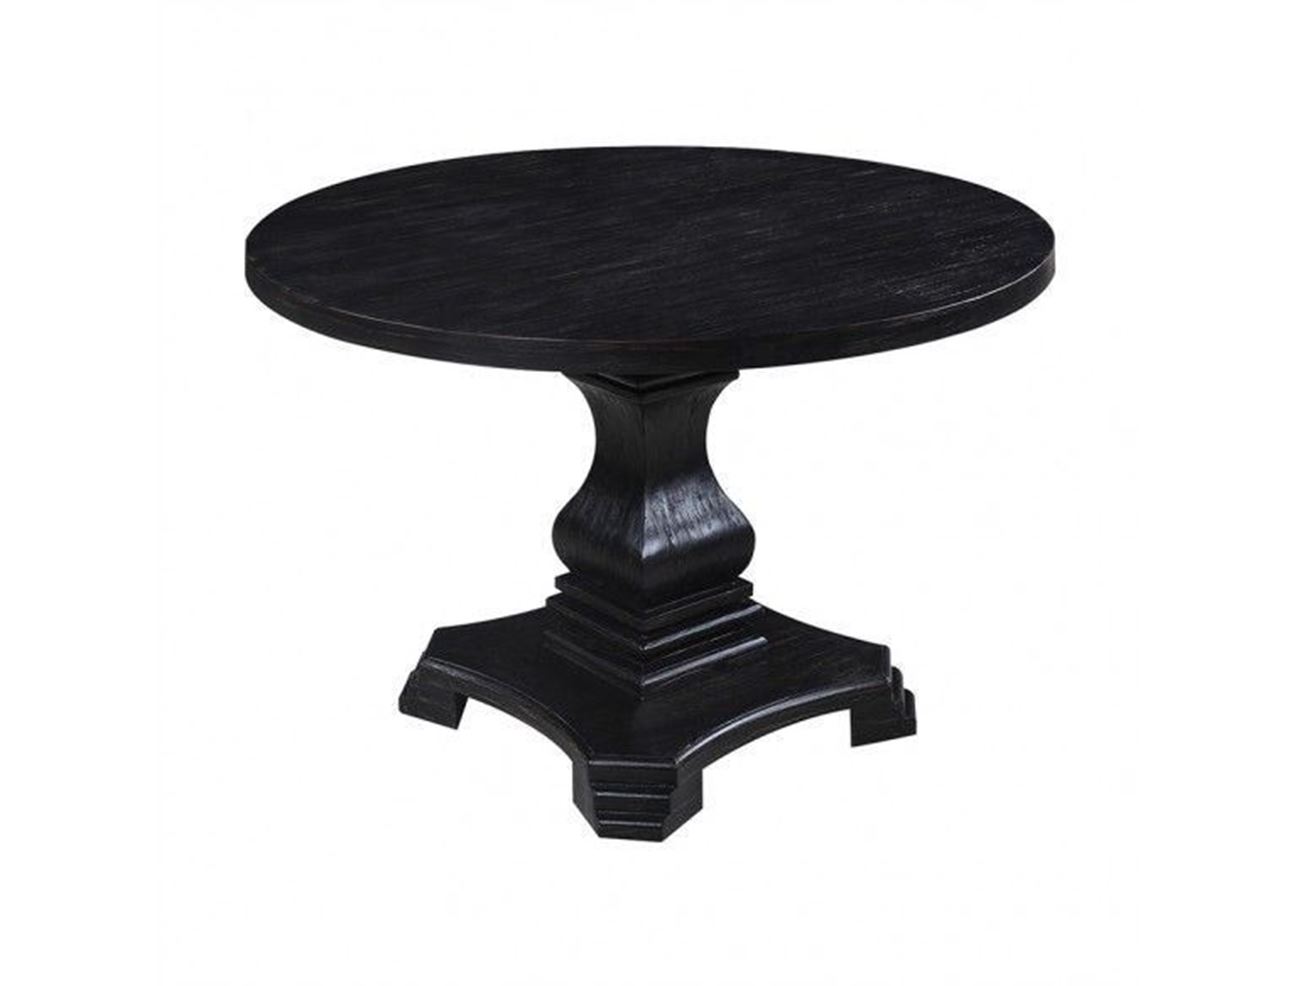 engaging black round pedestal end table tables unfinished distressed diy accent oak large antique tall bedside winning small wood full size glass plant stand plum tablecloth grill